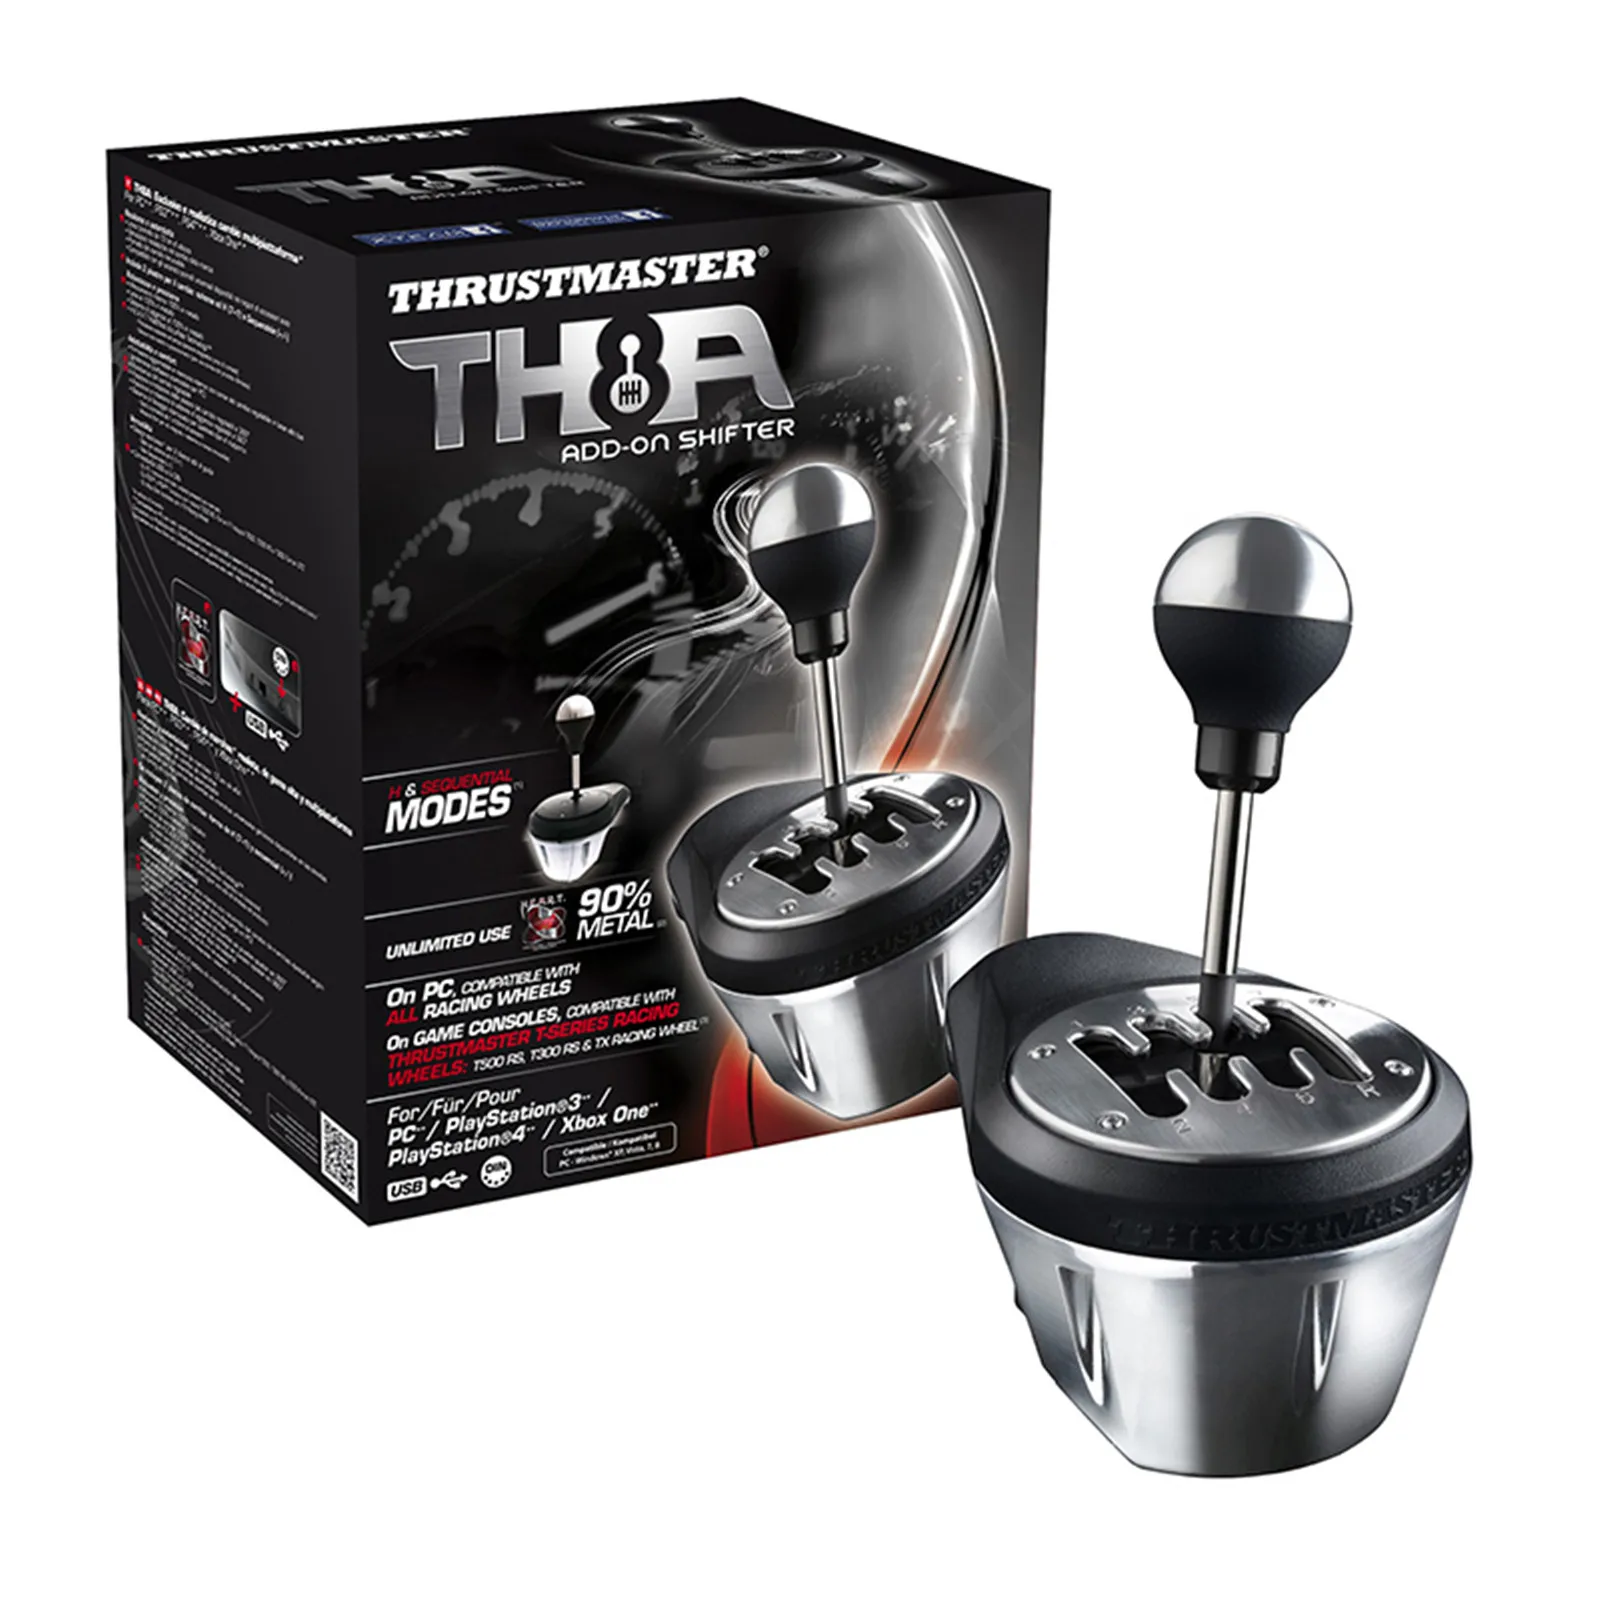 TH8S mod stronger rubber upgrade for Thrustmaster shifter gearbox